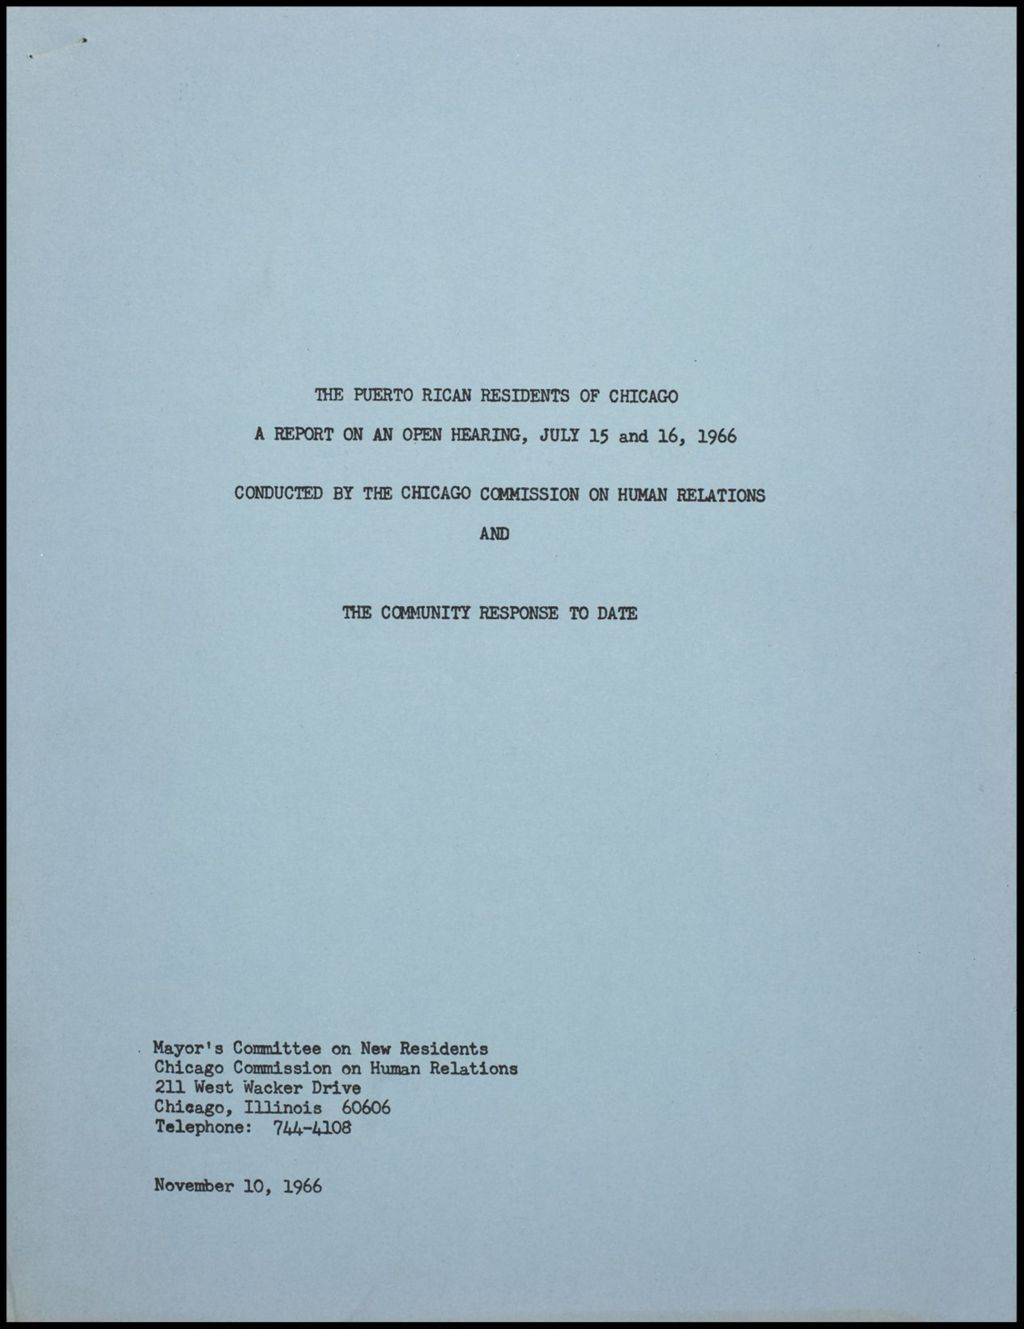 The Puerto Rican Residence of Chicago Mayors Committee on New Residents, 1966 (Folder III-1819)